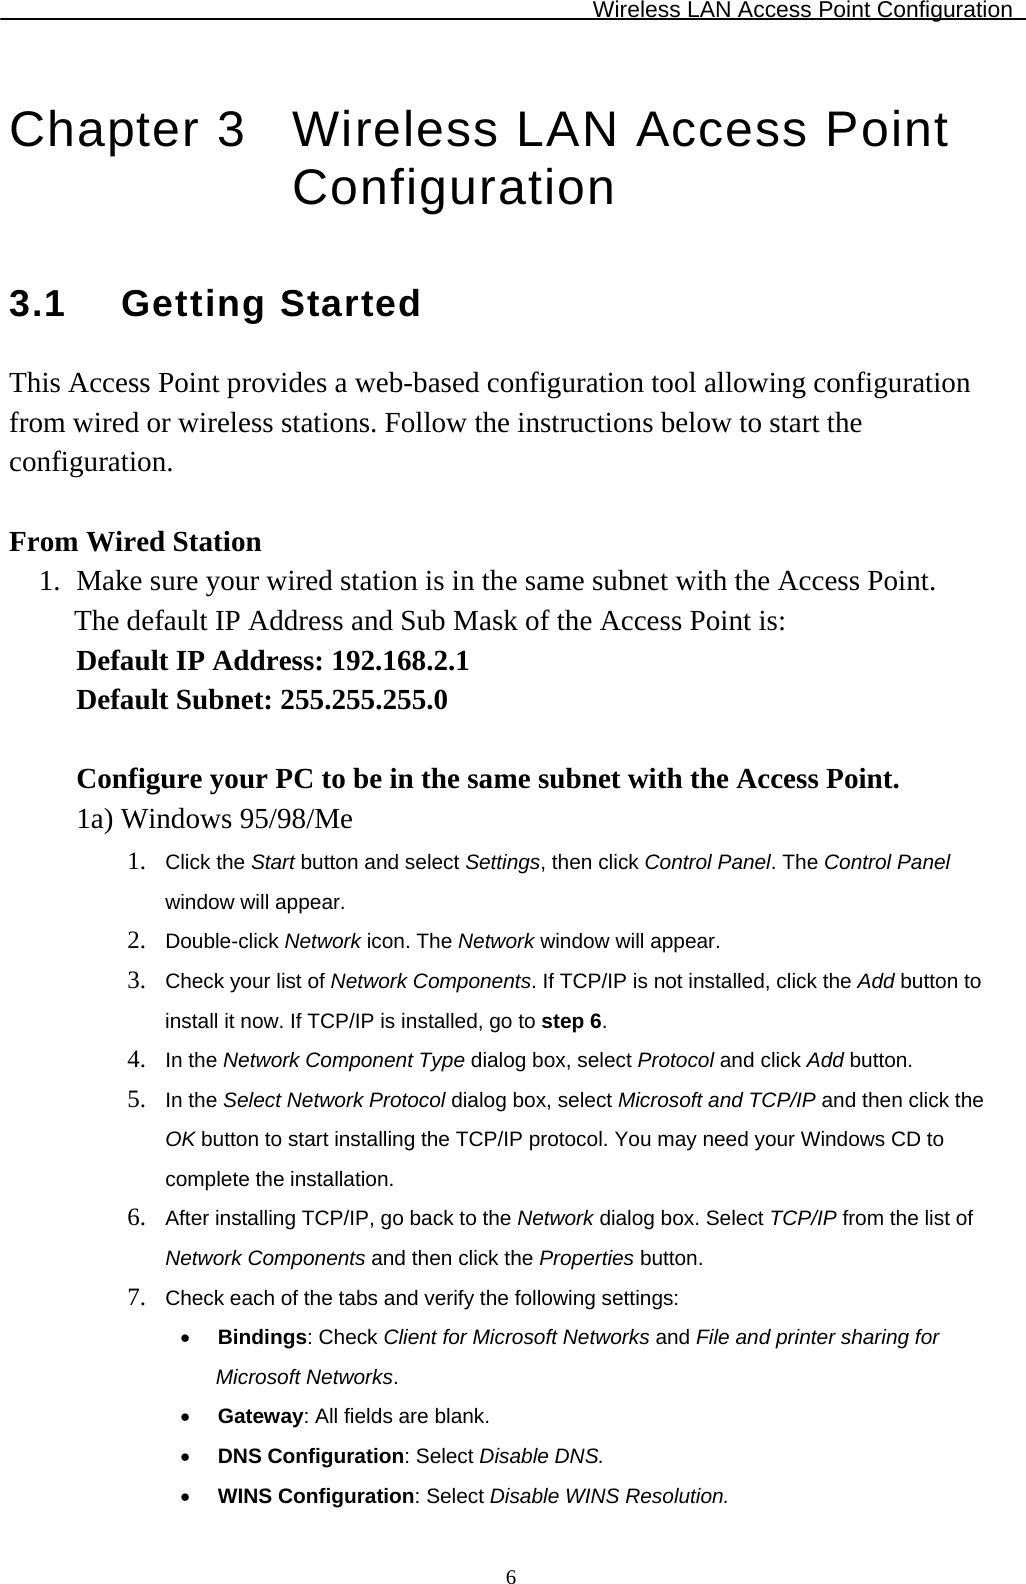 Wireless LAN Access Point Configuration  6Chapter 3  Wireless LAN Access Point Configuration 3.1 Getting Started This Access Point provides a web-based configuration tool allowing configuration from wired or wireless stations. Follow the instructions below to start the configuration.  From Wired Station 1. Make sure your wired station is in the same subnet with the Access Point.  The default IP Address and Sub Mask of the Access Point is: Default IP Address: 192.168.2.1 Default Subnet: 255.255.255.0  Configure your PC to be in the same subnet with the Access Point.  1a) Windows 95/98/Me 1. Click the Start button and select Settings, then click Control Panel. The Control Panel window will appear. 2. Double-click Network icon. The Network window will appear. 3. Check your list of Network Components. If TCP/IP is not installed, click the Add button to install it now. If TCP/IP is installed, go to step 6. 4. In the Network Component Type dialog box, select Protocol and click Add button. 5. In the Select Network Protocol dialog box, select Microsoft and TCP/IP and then click the OK button to start installing the TCP/IP protocol. You may need your Windows CD to complete the installation. 6. After installing TCP/IP, go back to the Network dialog box. Select TCP/IP from the list of     Network Components and then click the Properties button. 7. Check each of the tabs and verify the following settings: • Bindings: Check Client for Microsoft Networks and File and printer sharing for Microsoft Networks. • Gateway: All fields are blank. • DNS Configuration: Select Disable DNS. • WINS Configuration: Select Disable WINS Resolution. 